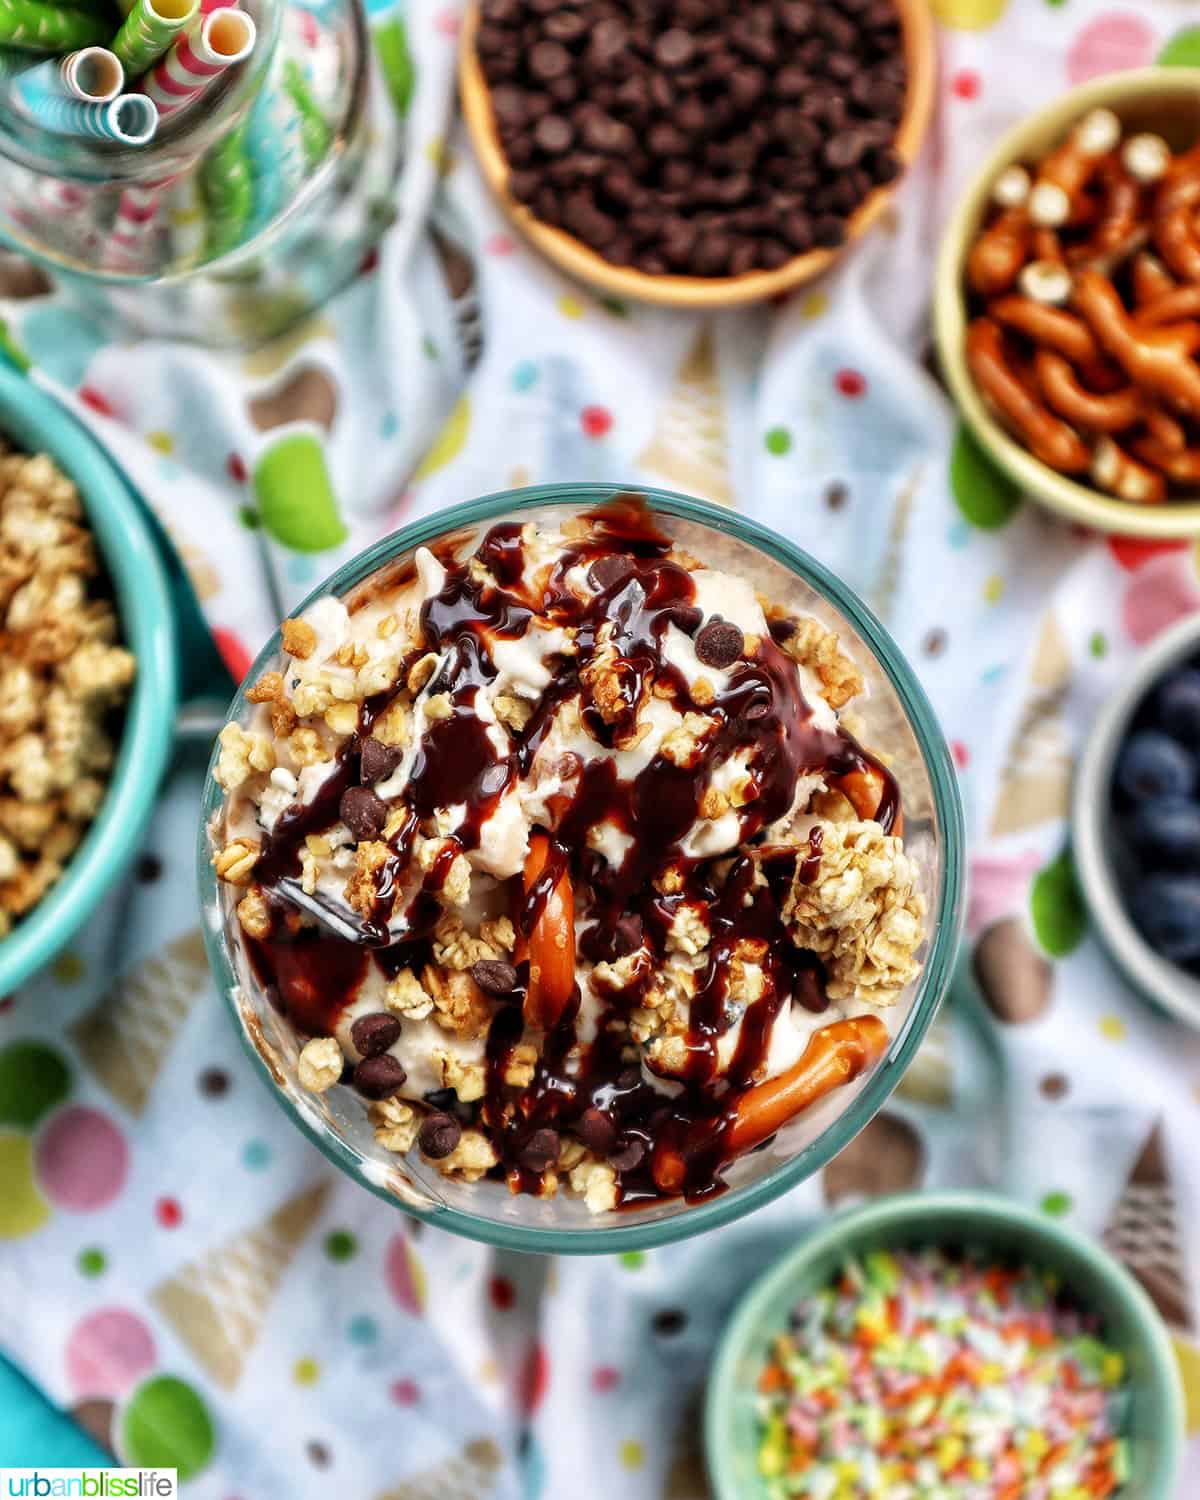 ice cream parfait topped with granola, chocolate syrup, mini chocolate chips on a colorful kitchen towel surrounded by sides of more toppings.